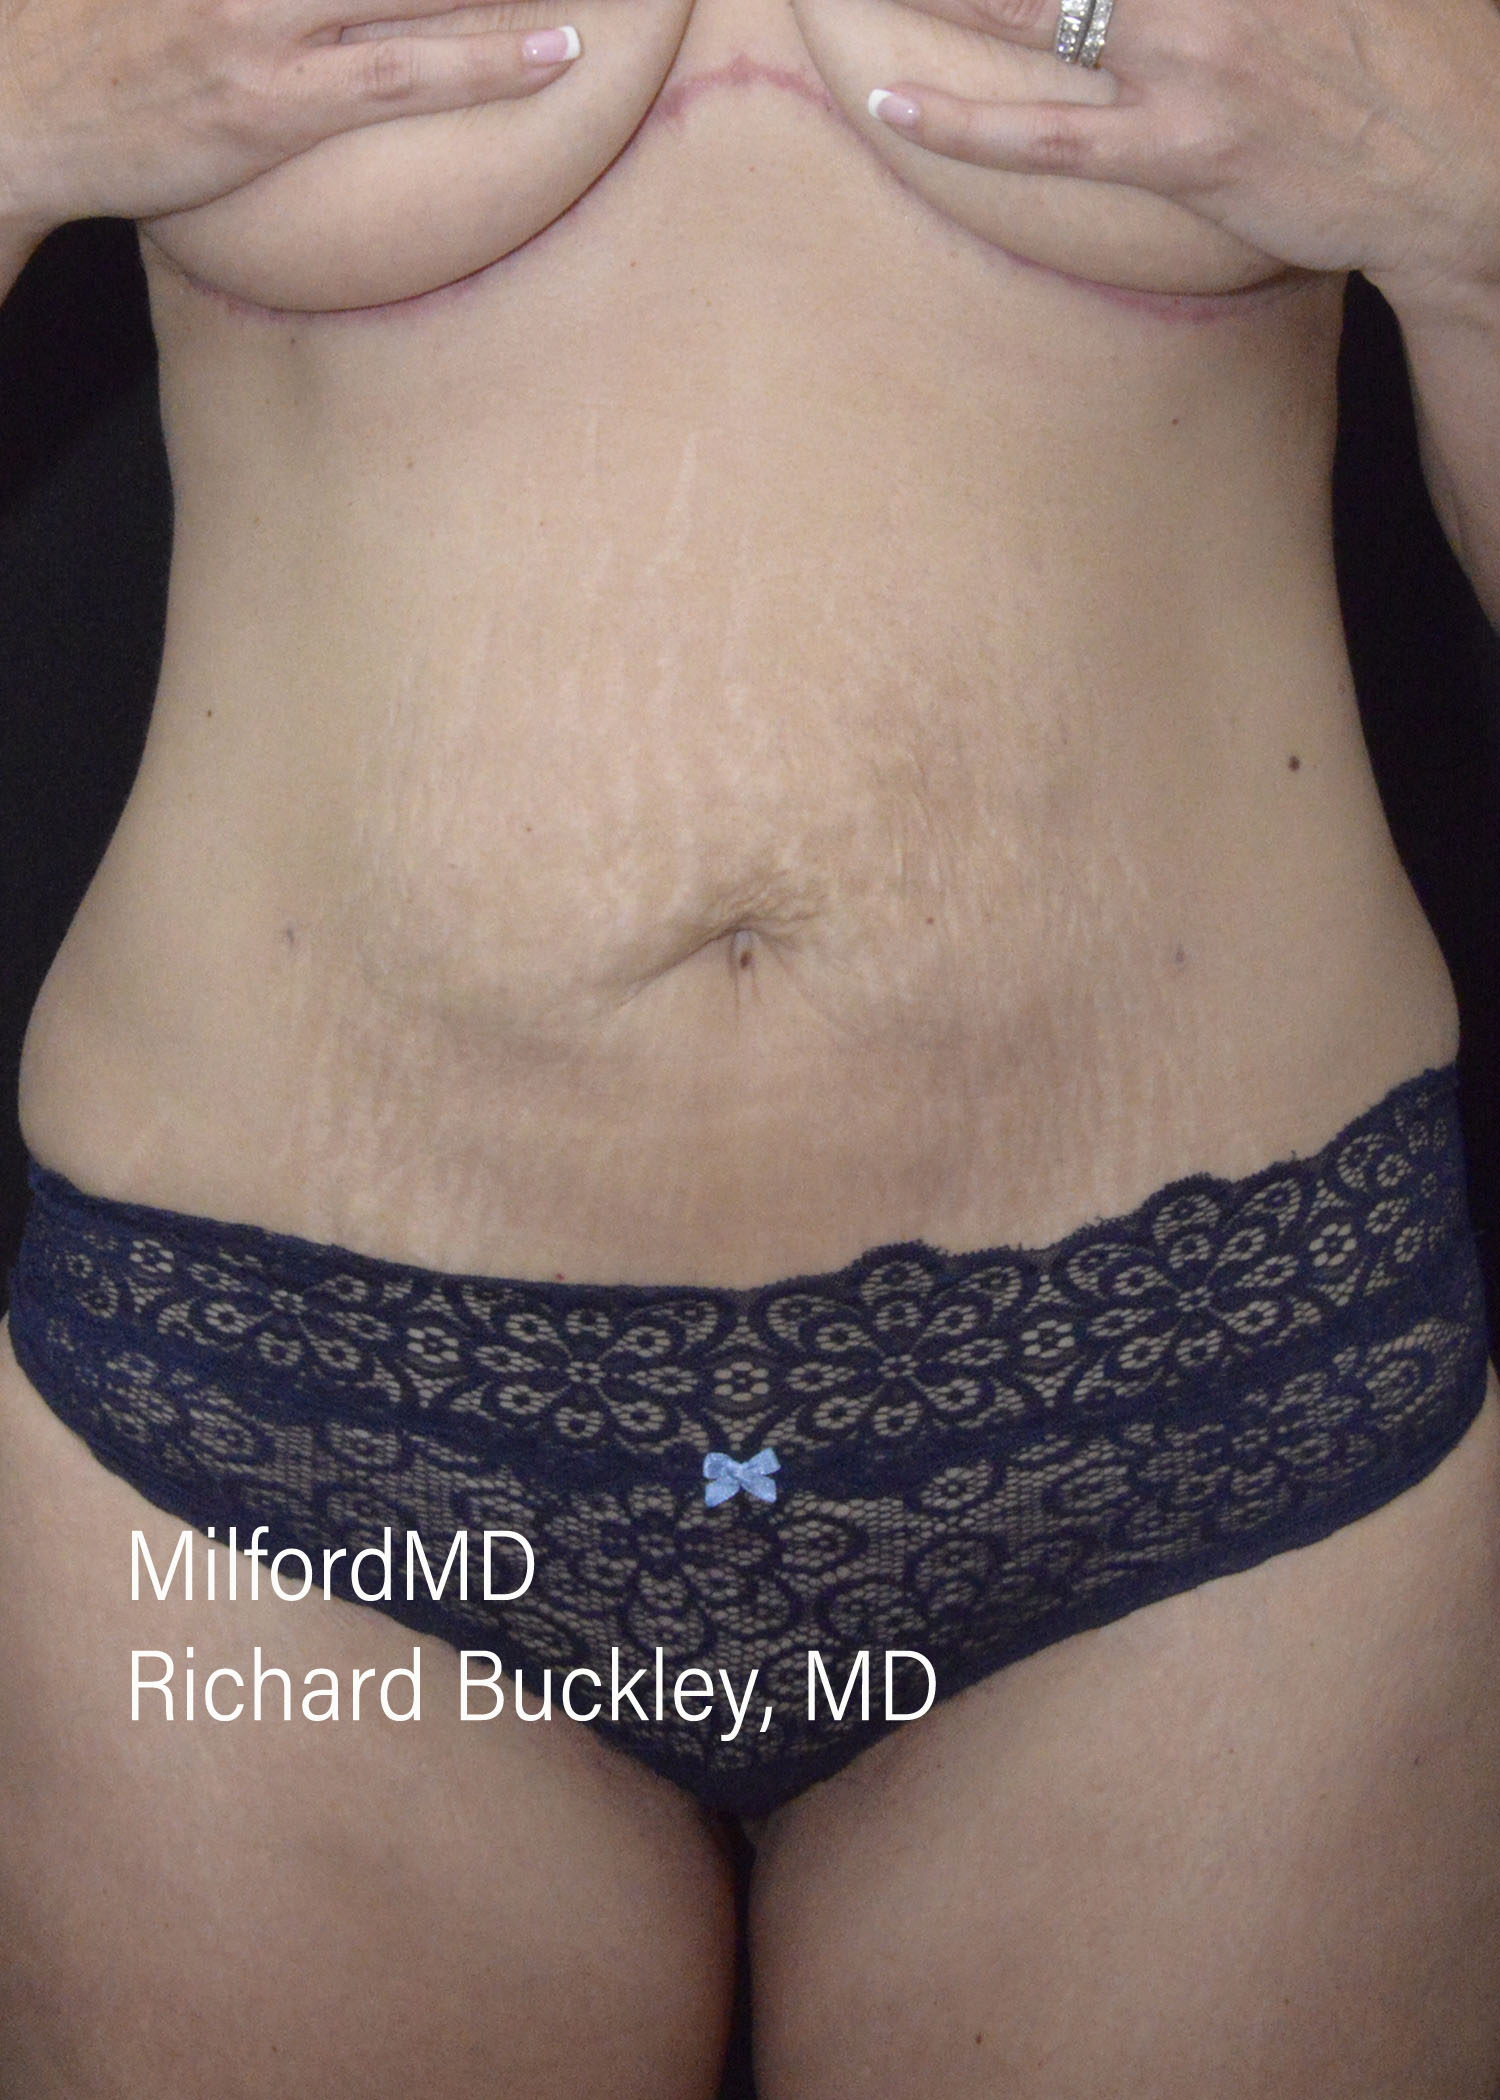 Reverse Abdominoplasty Before and After Photos,Reverse Abdominoplasty,Reverse Abdominoplasty Before and After, Abdominoplasty – Reverse